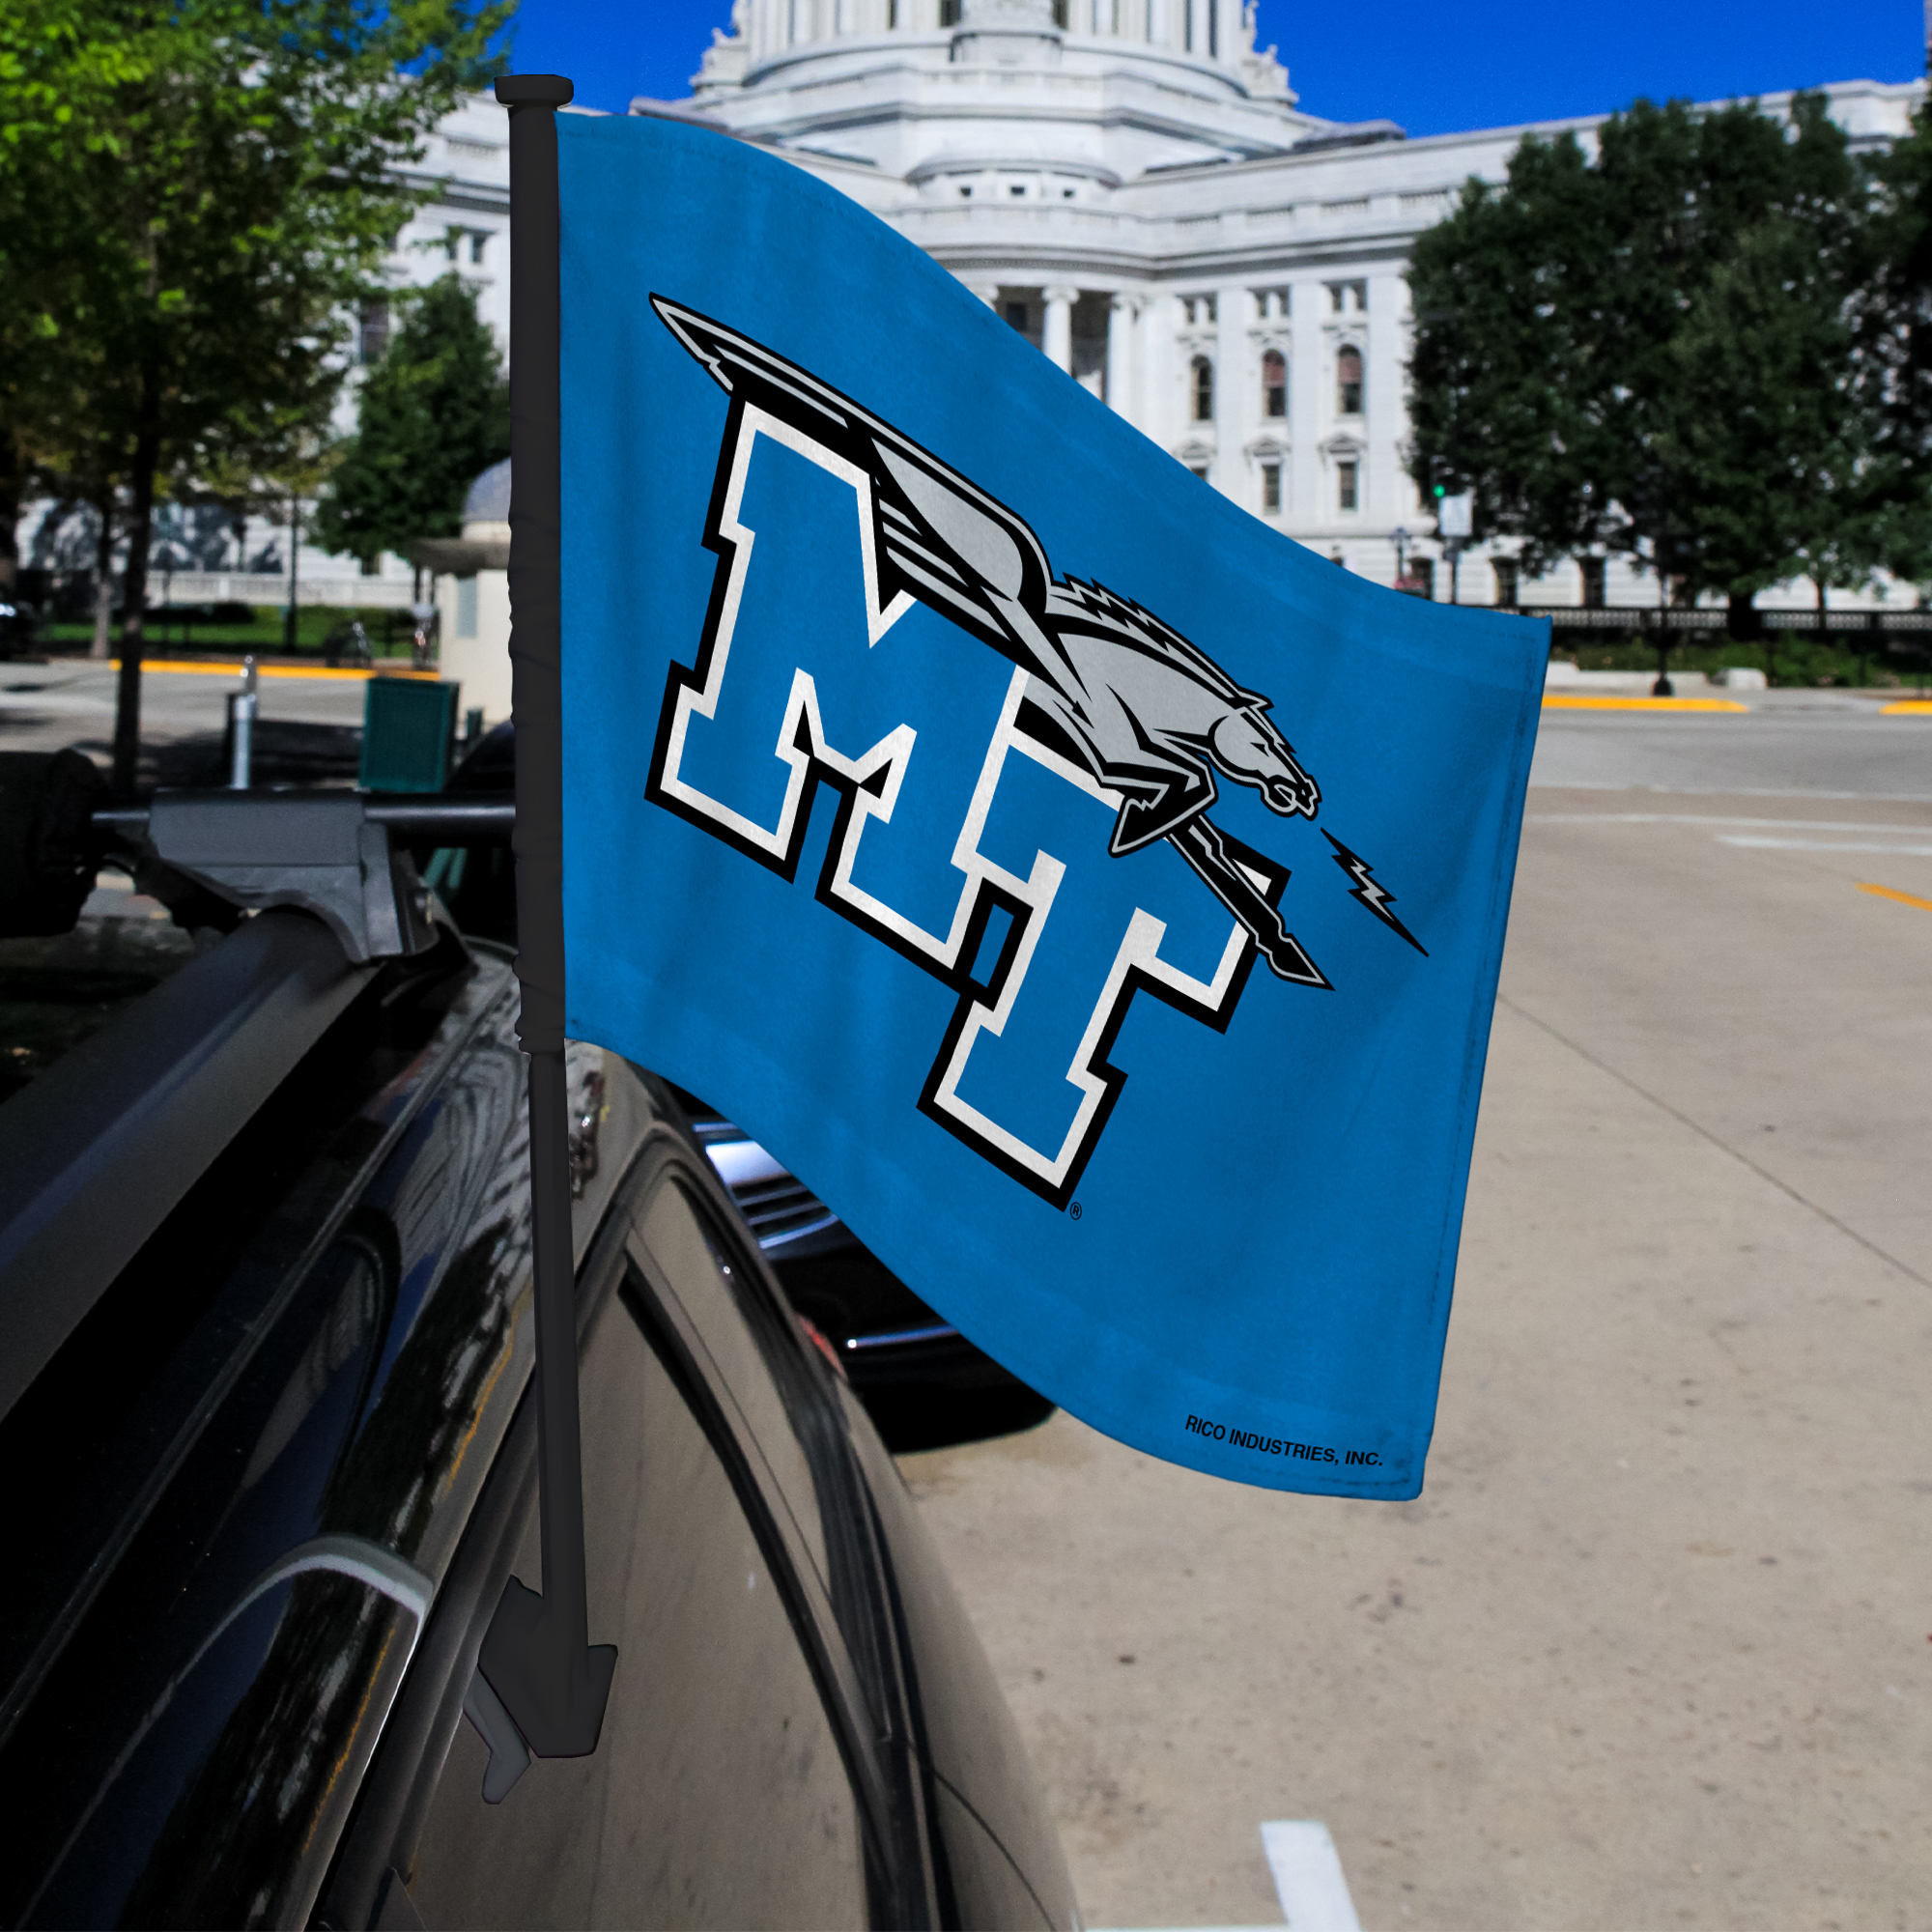 RicoIndustries FGK180604 Middle Tennessee State Blue Raiders Car Flag with Black Pole - image 2 of 8